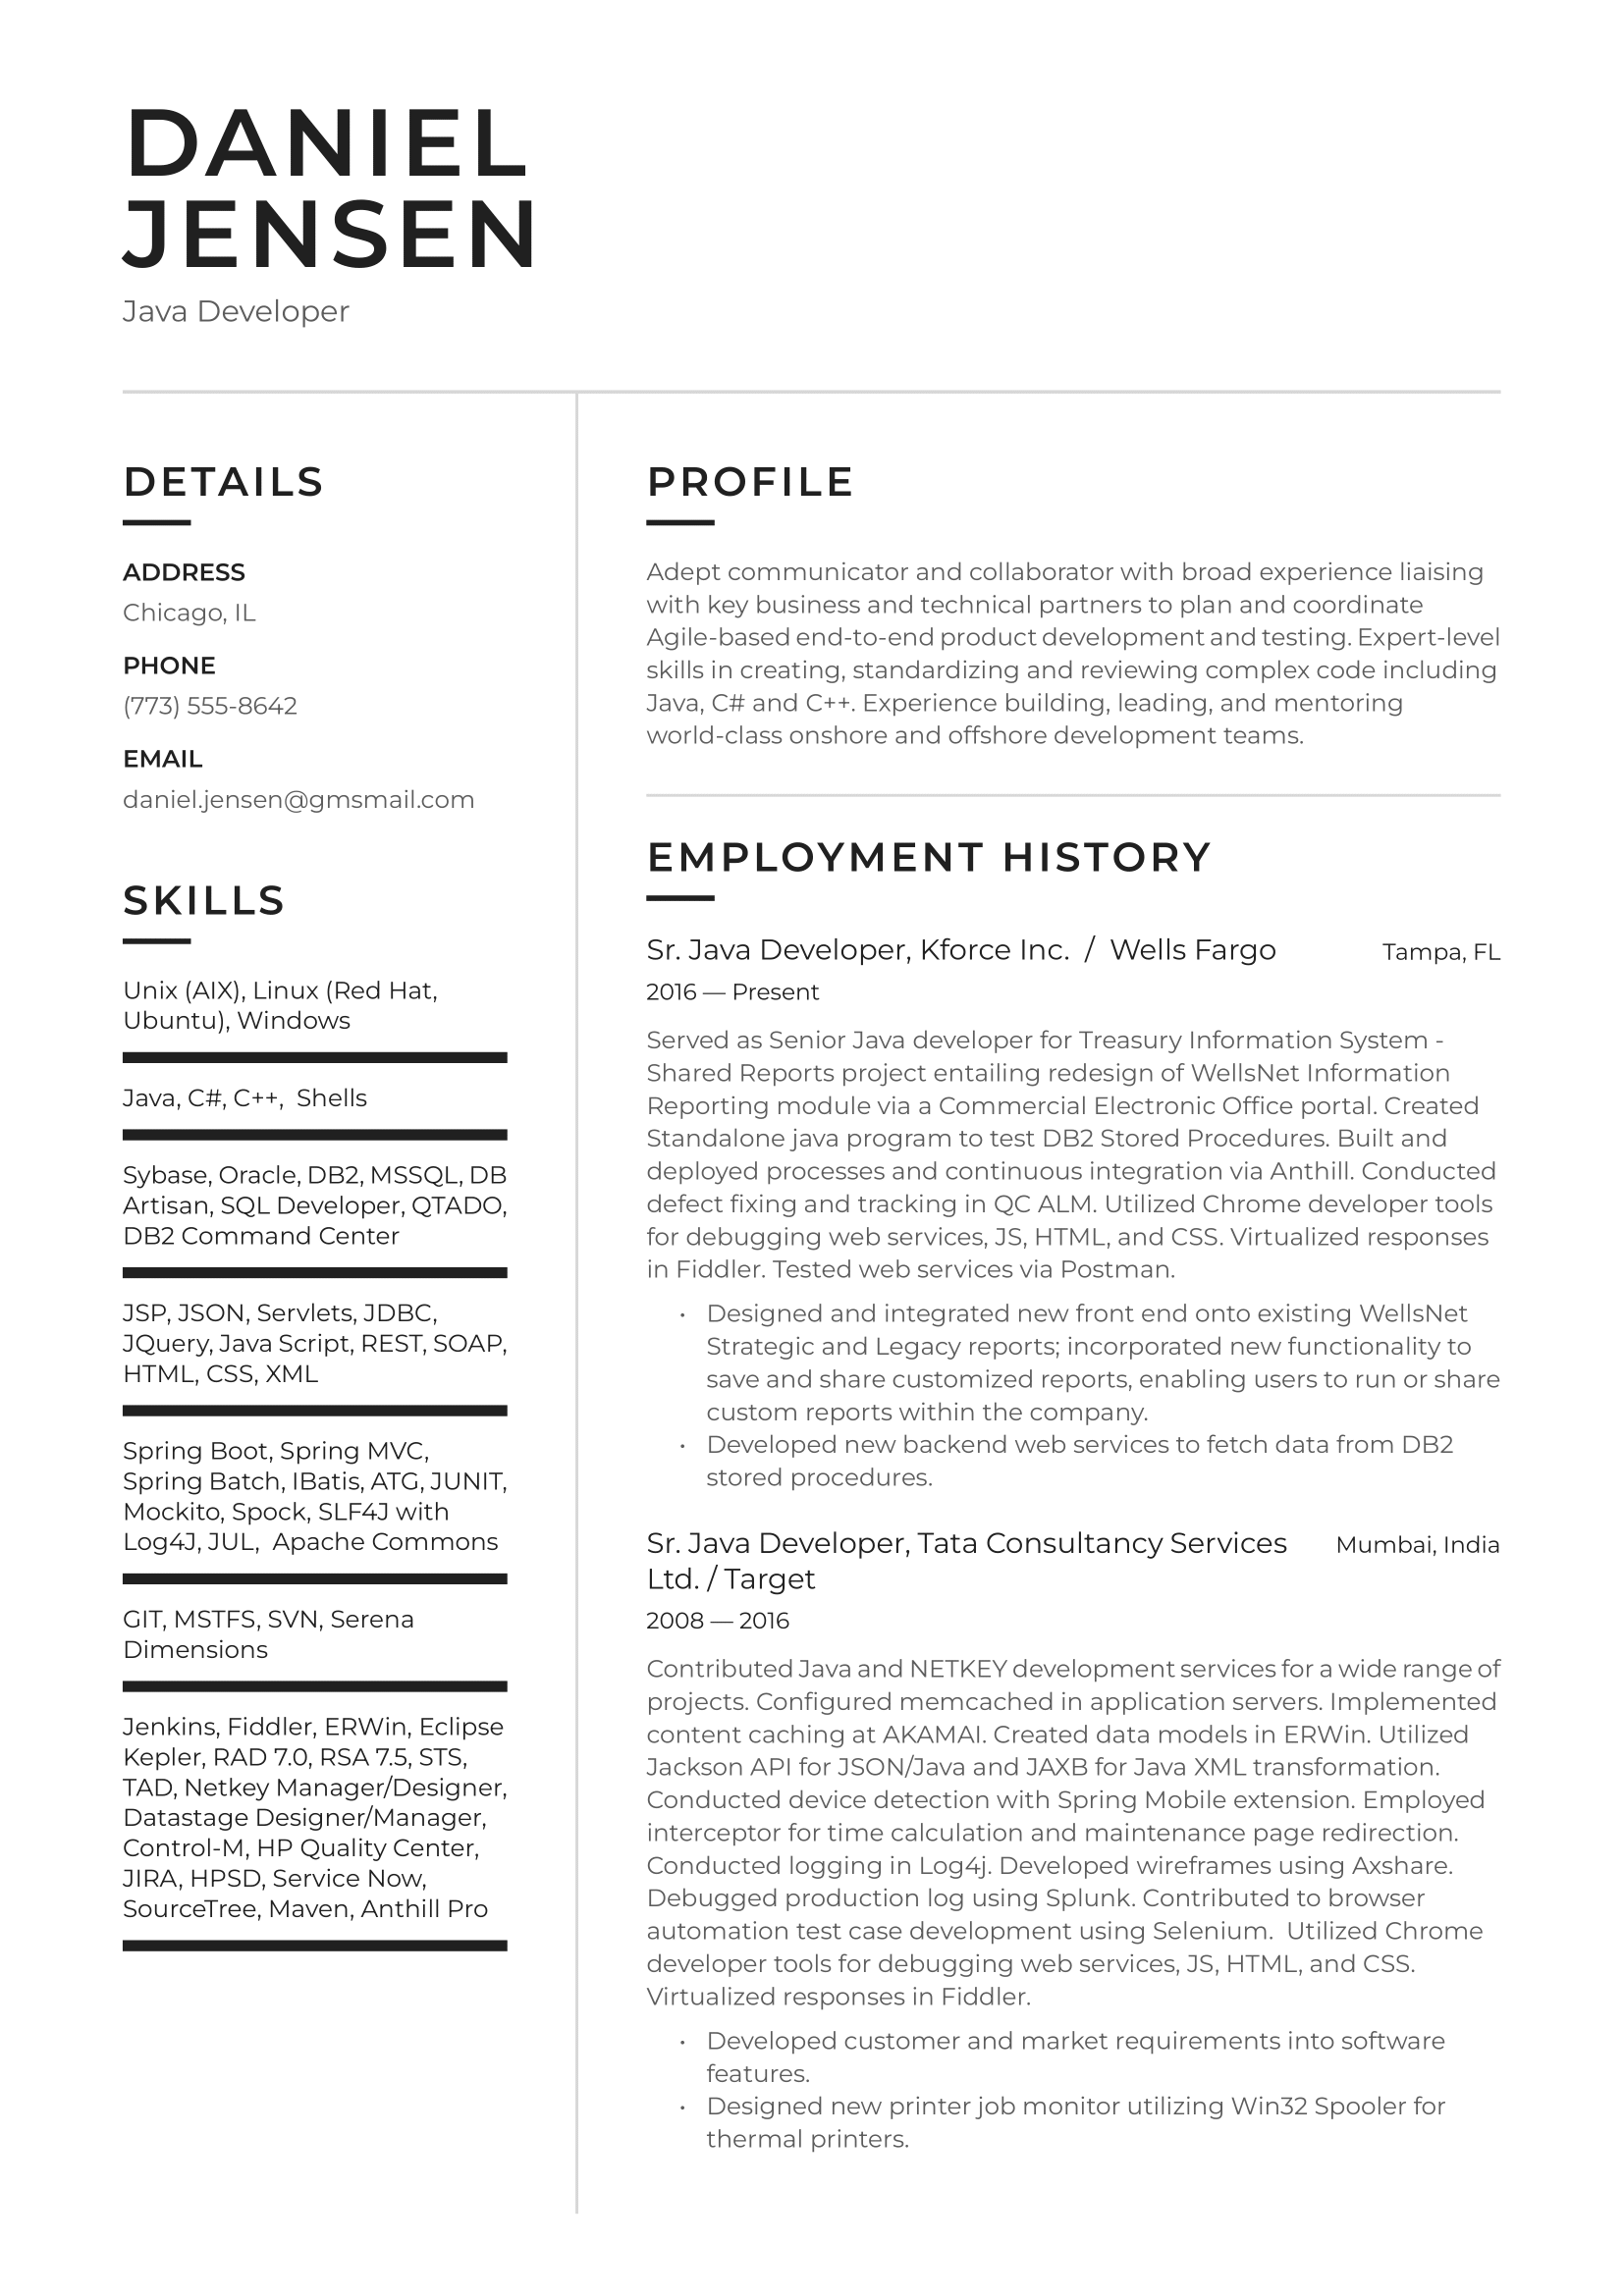 Java Developer Resume Example and Writing Guide